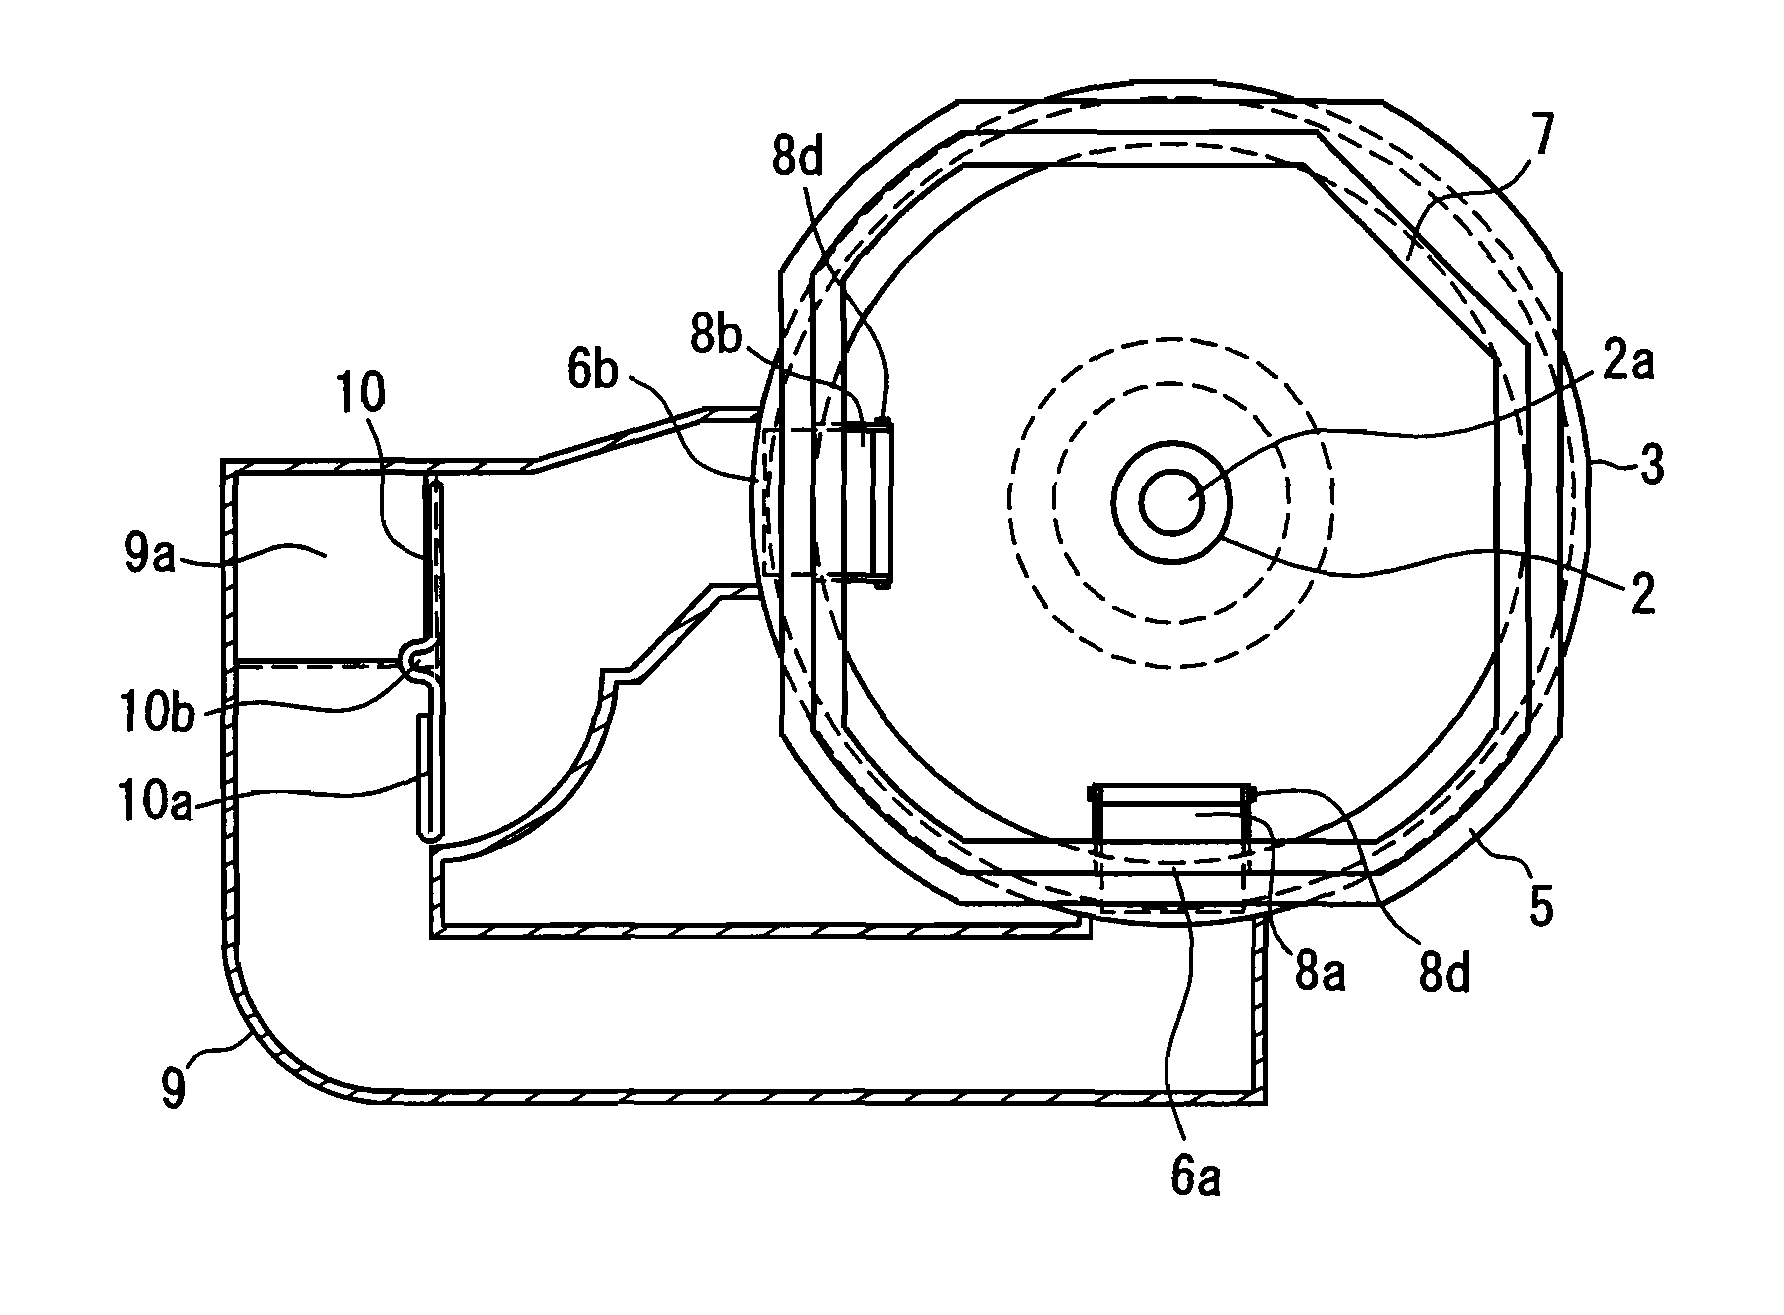 Projection display device with a cooling air fan